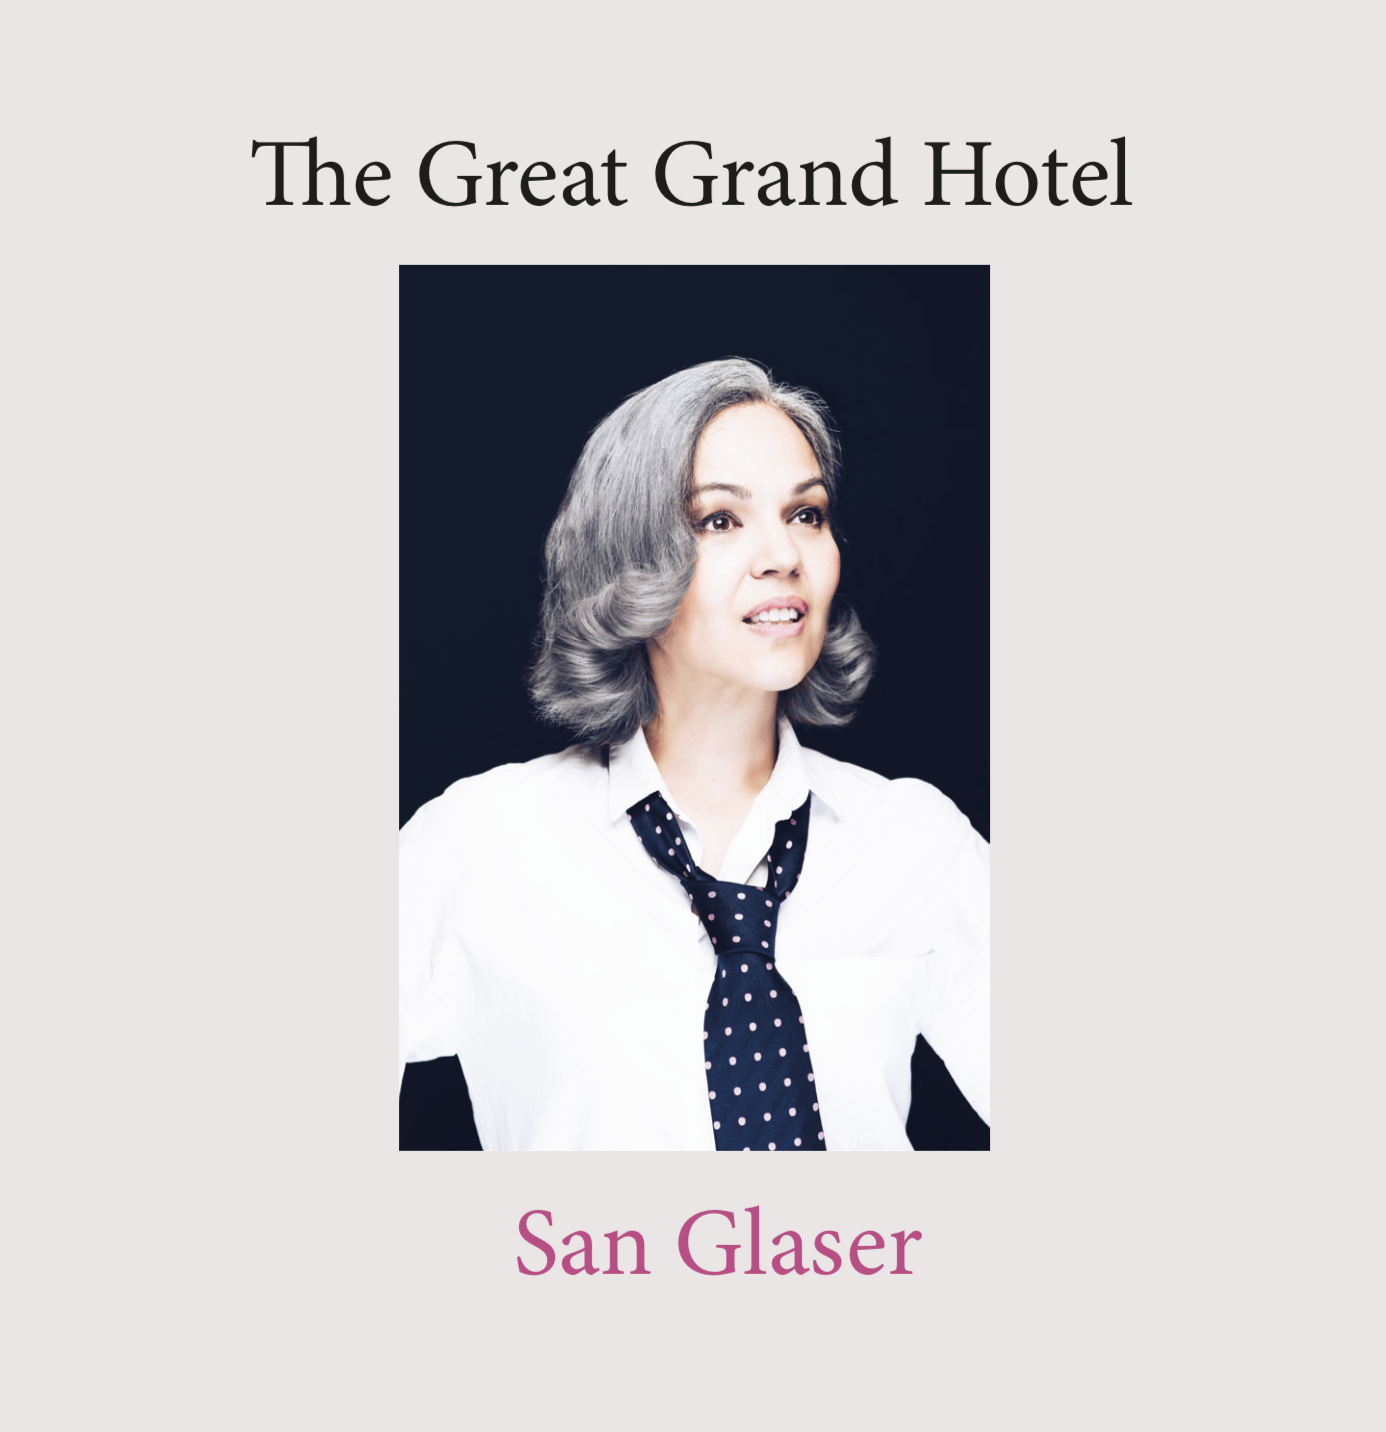 The Great Grand Hotel